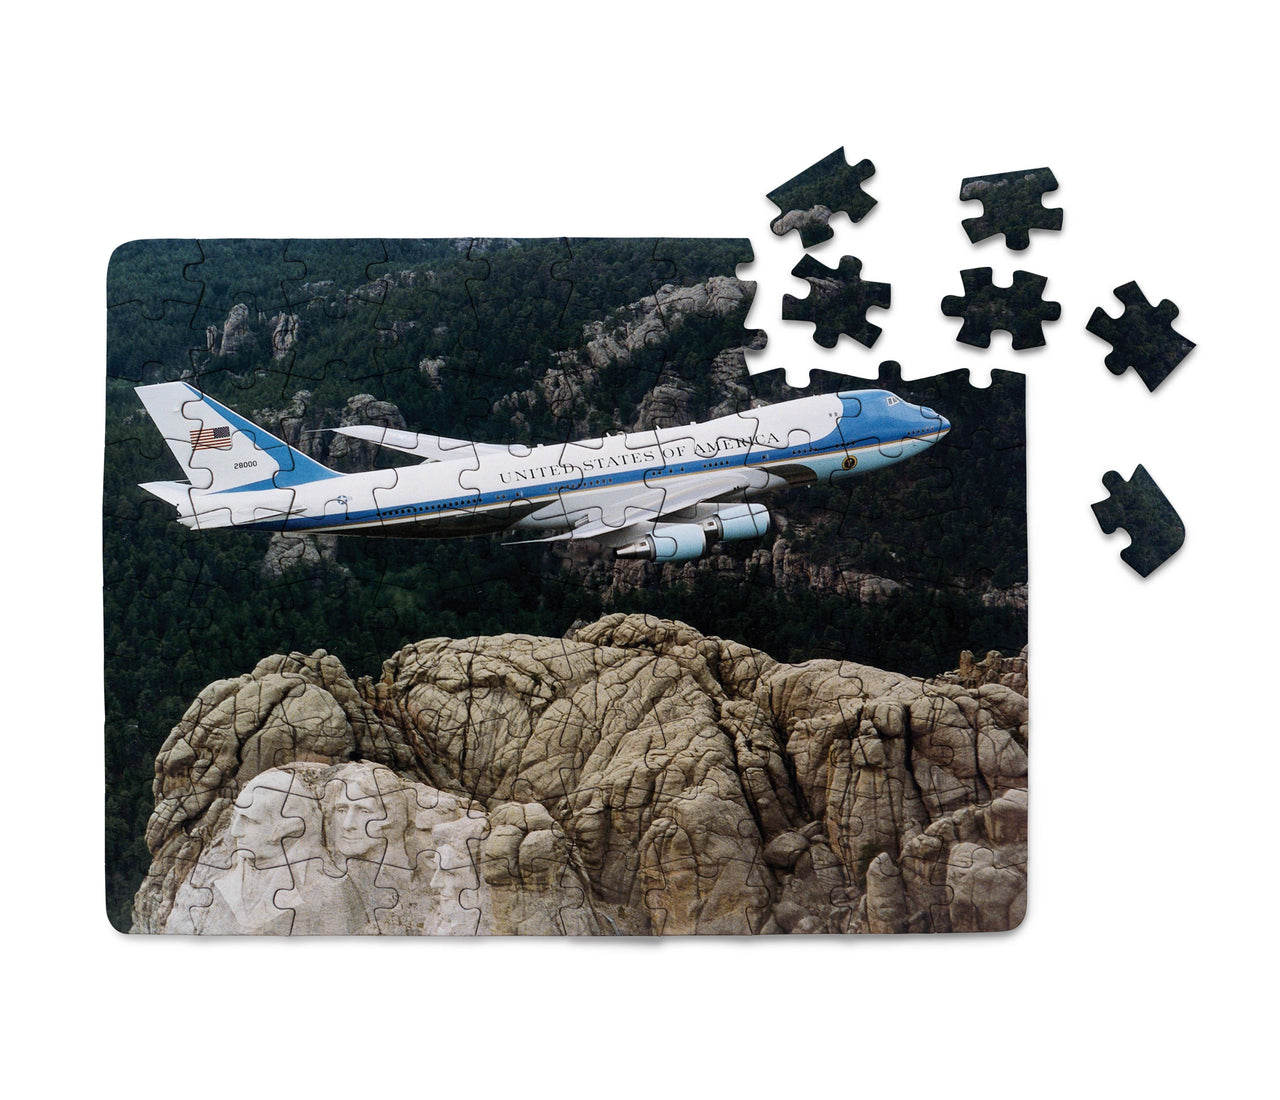 Cruising United States of America Boeing 747 Printed Puzzles Aviation Shop 